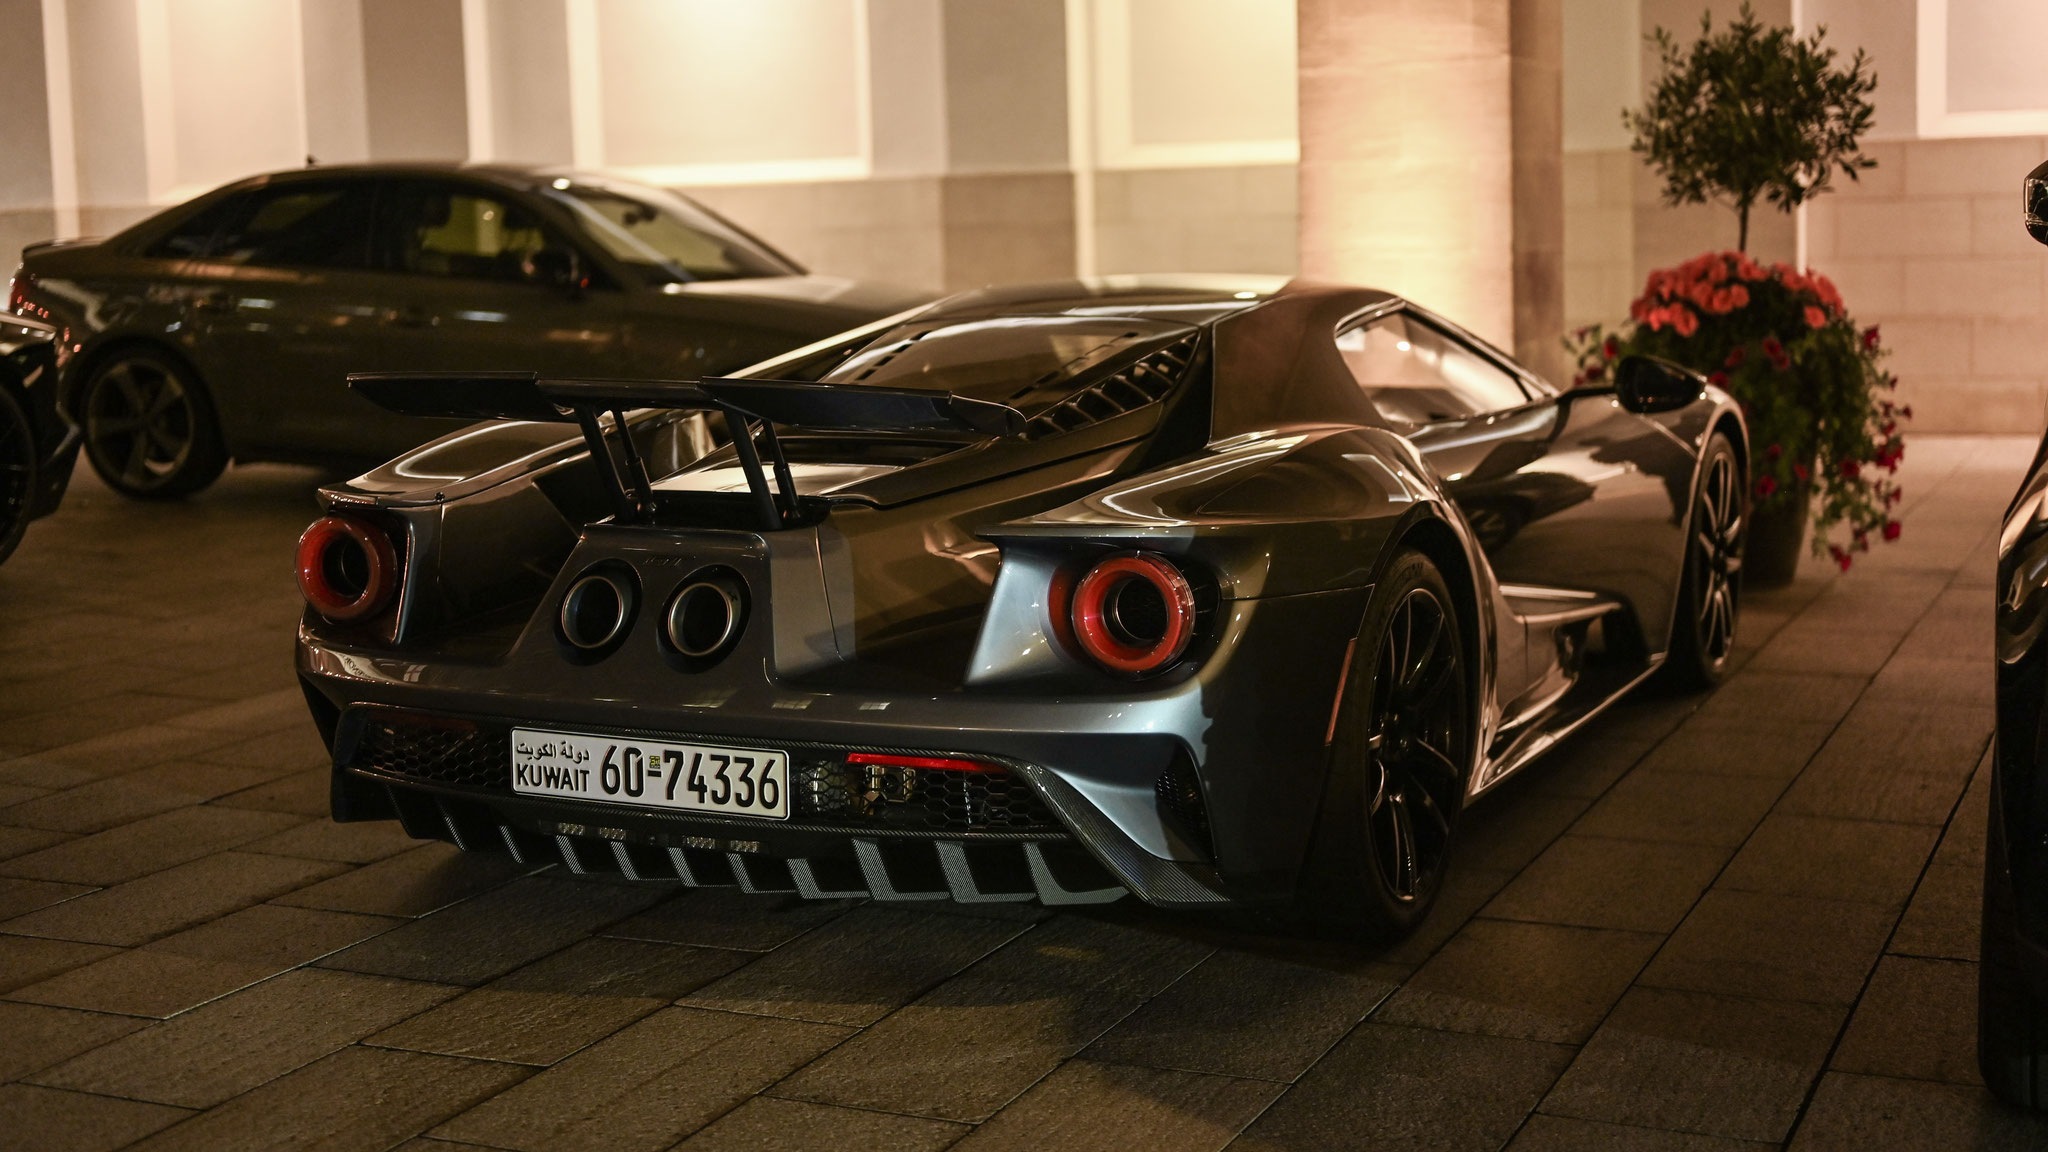 Ford GT - 6074336 (KWT)